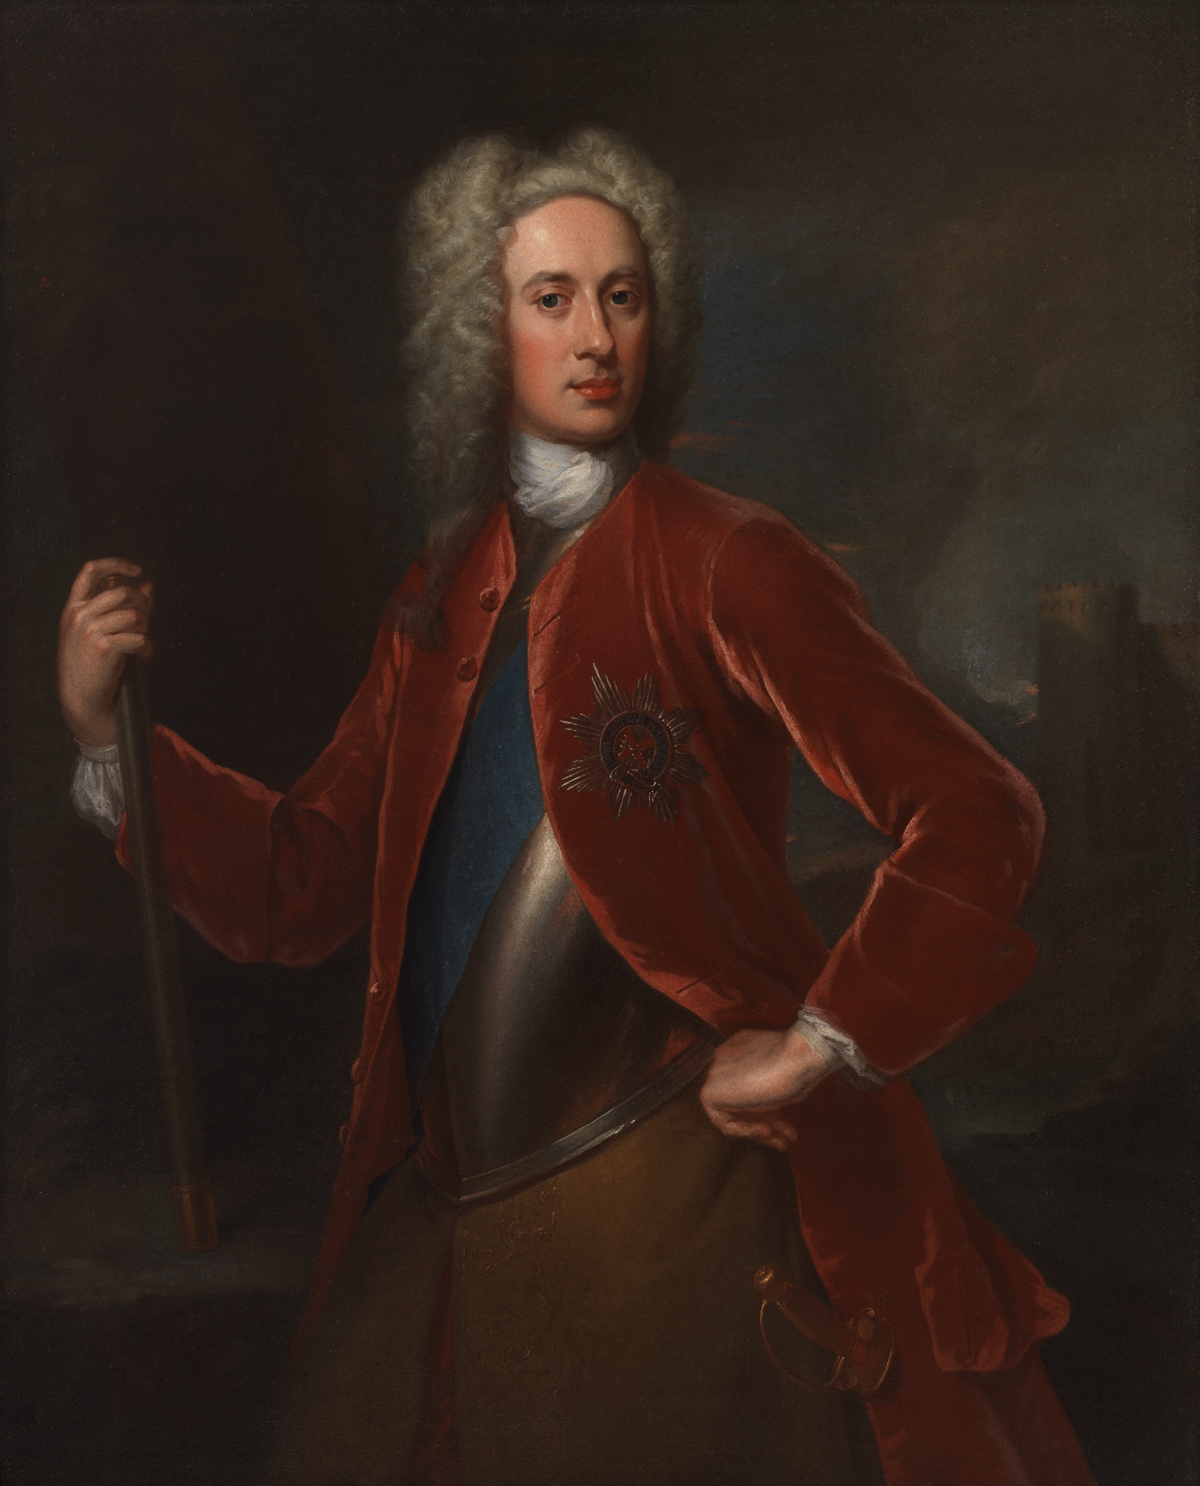 John Campbell, second duke of Argyll and duke of Greenwich, c. 1718–25, by William Aikman (1682–1731)